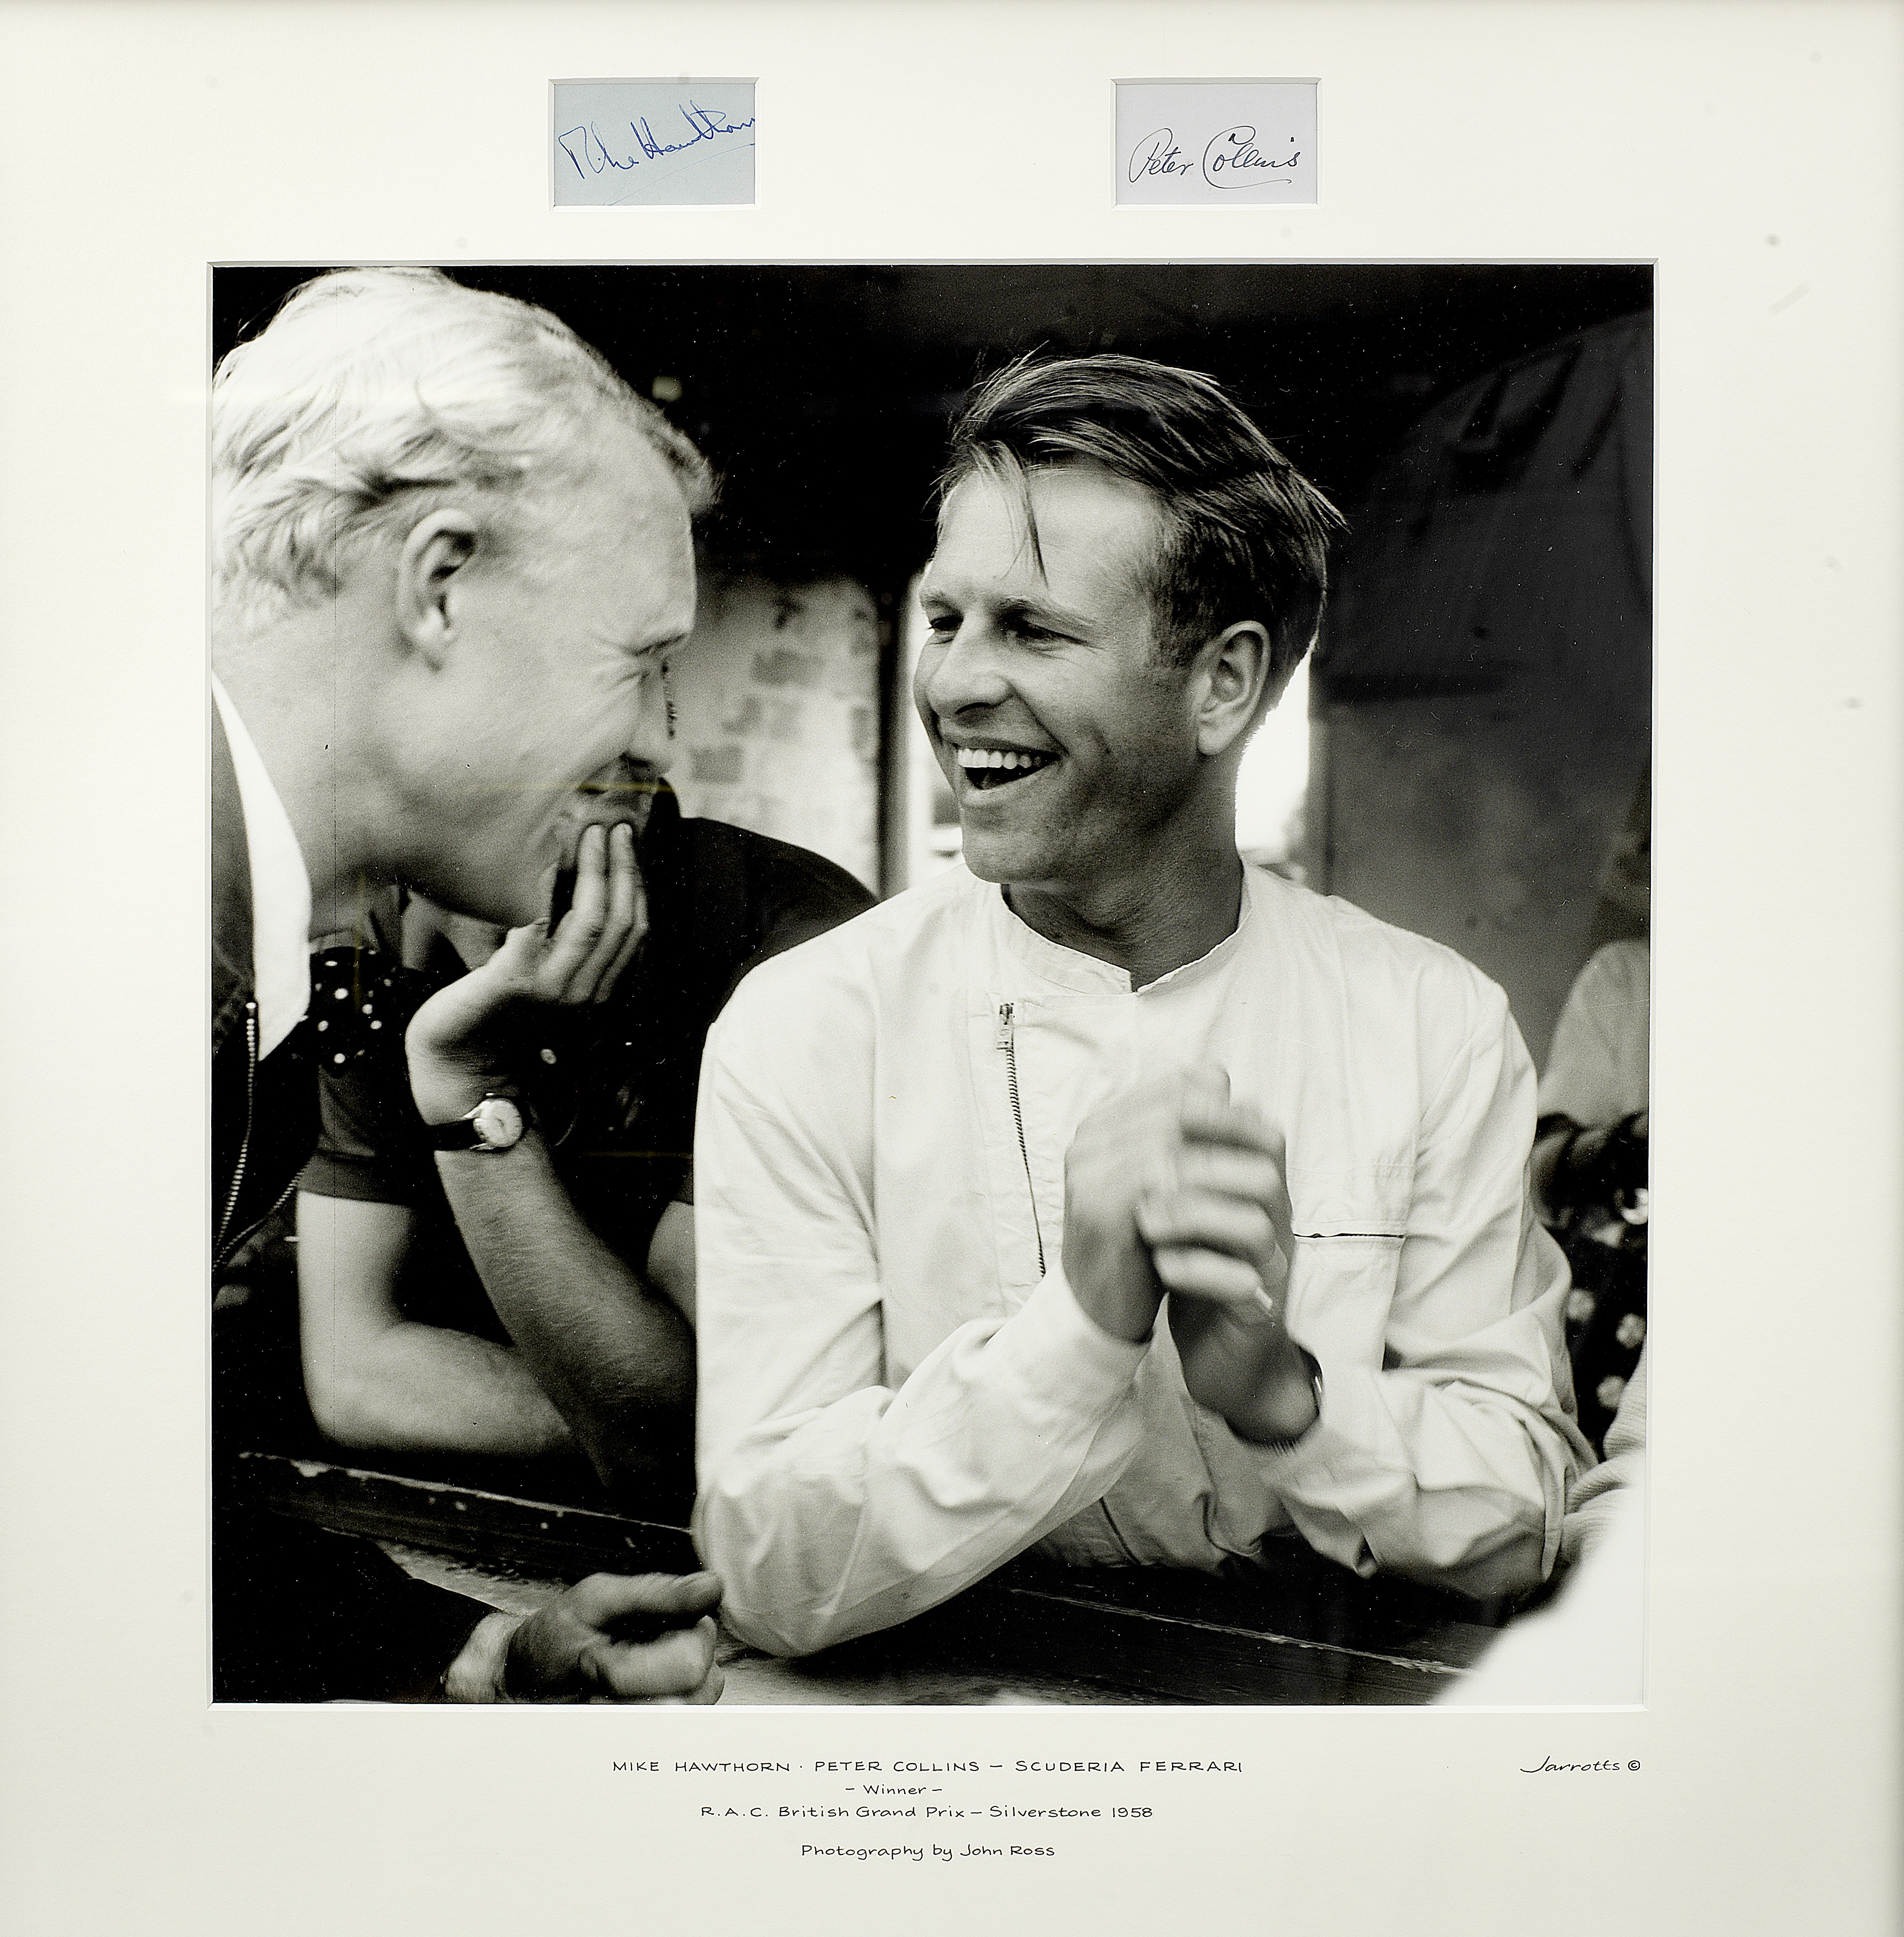 A framed photograph of Mike Hawthorn and Peter Collins with signatures,